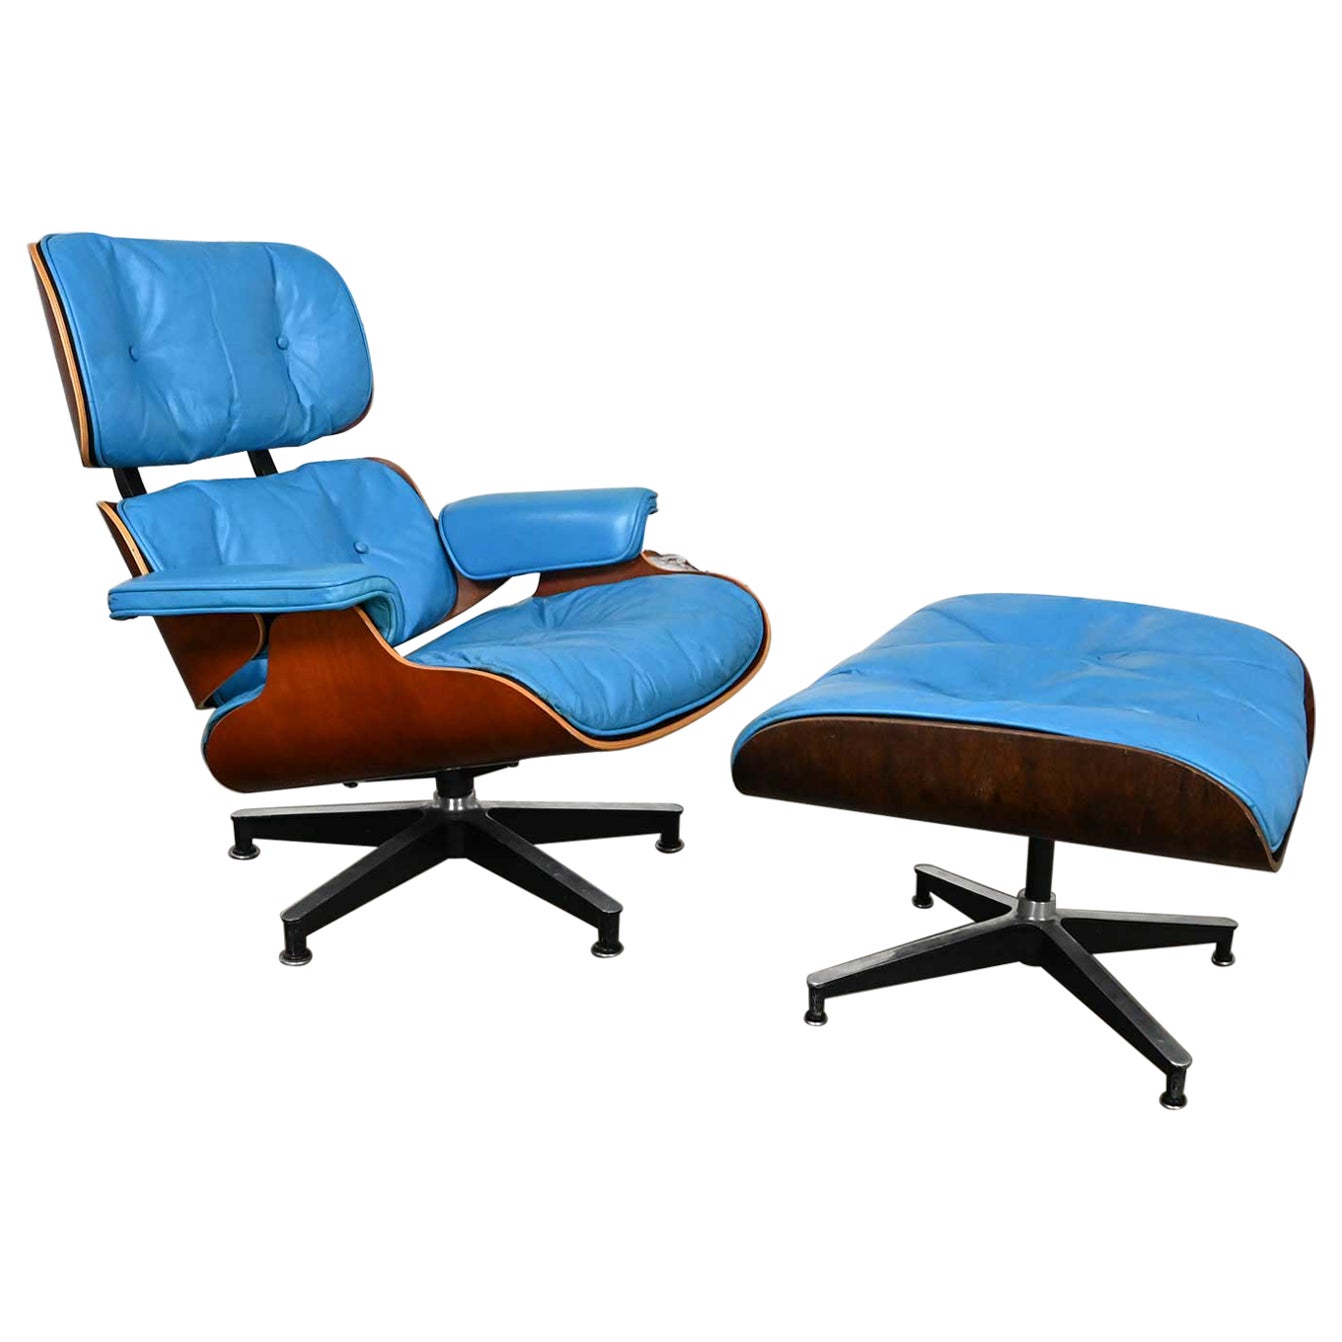 Eames 670 Lounge Chair 671 Ottoman Blue Leather Walnut Rosewood Herman Miller